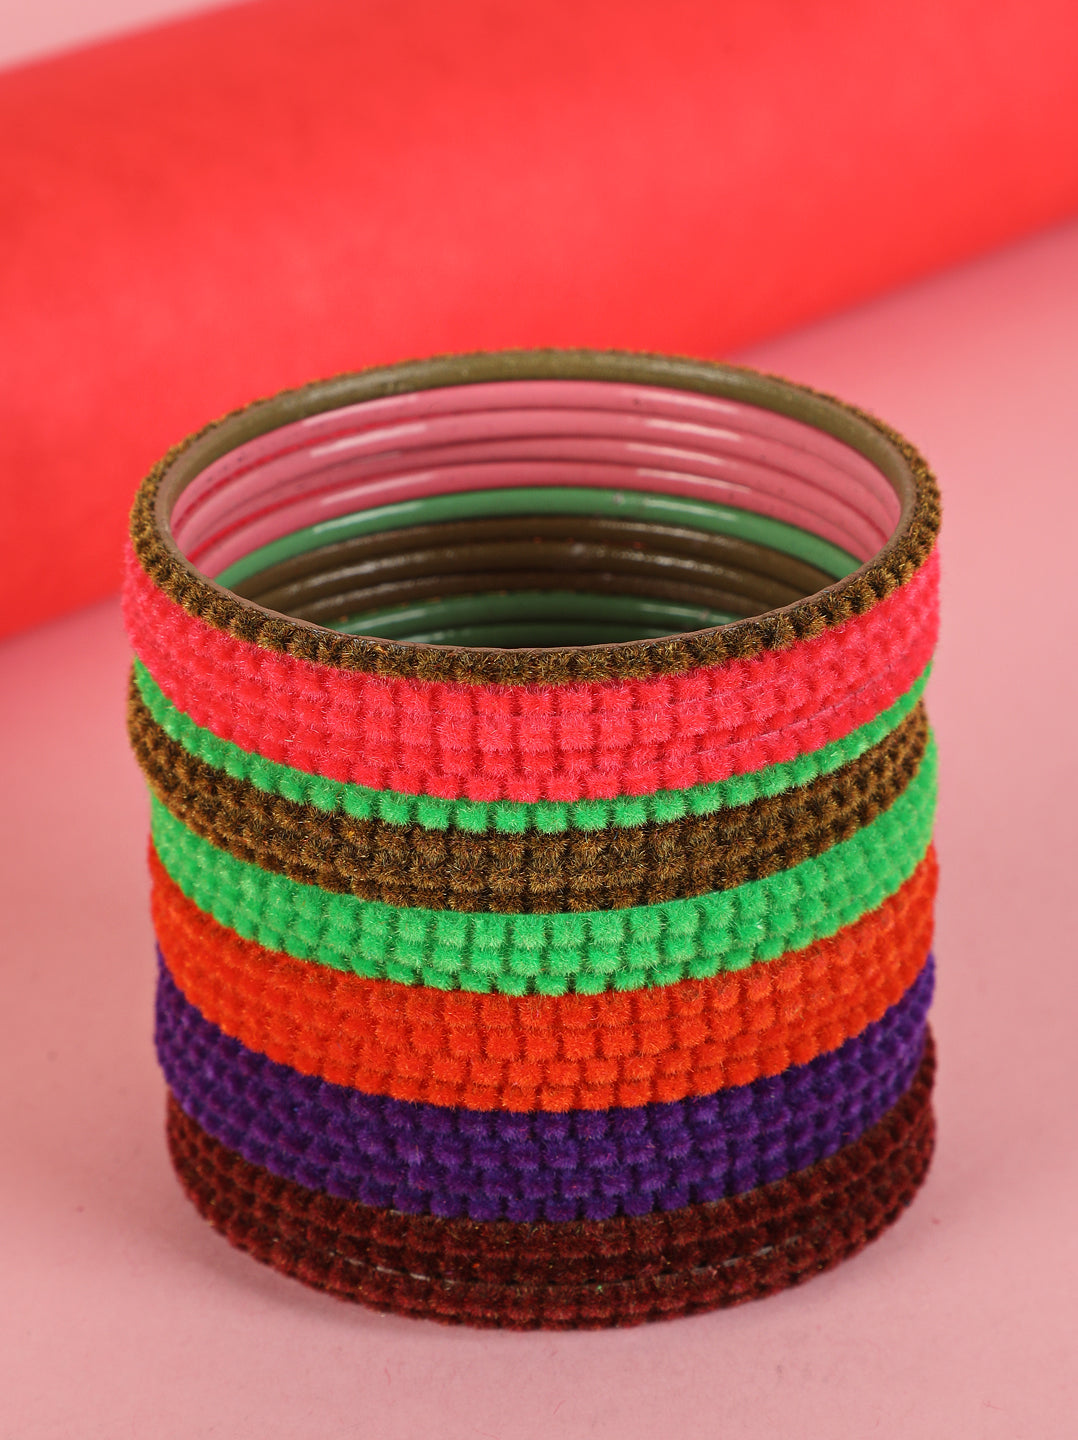 Set Of 24 Solid Handcrafted Bangles